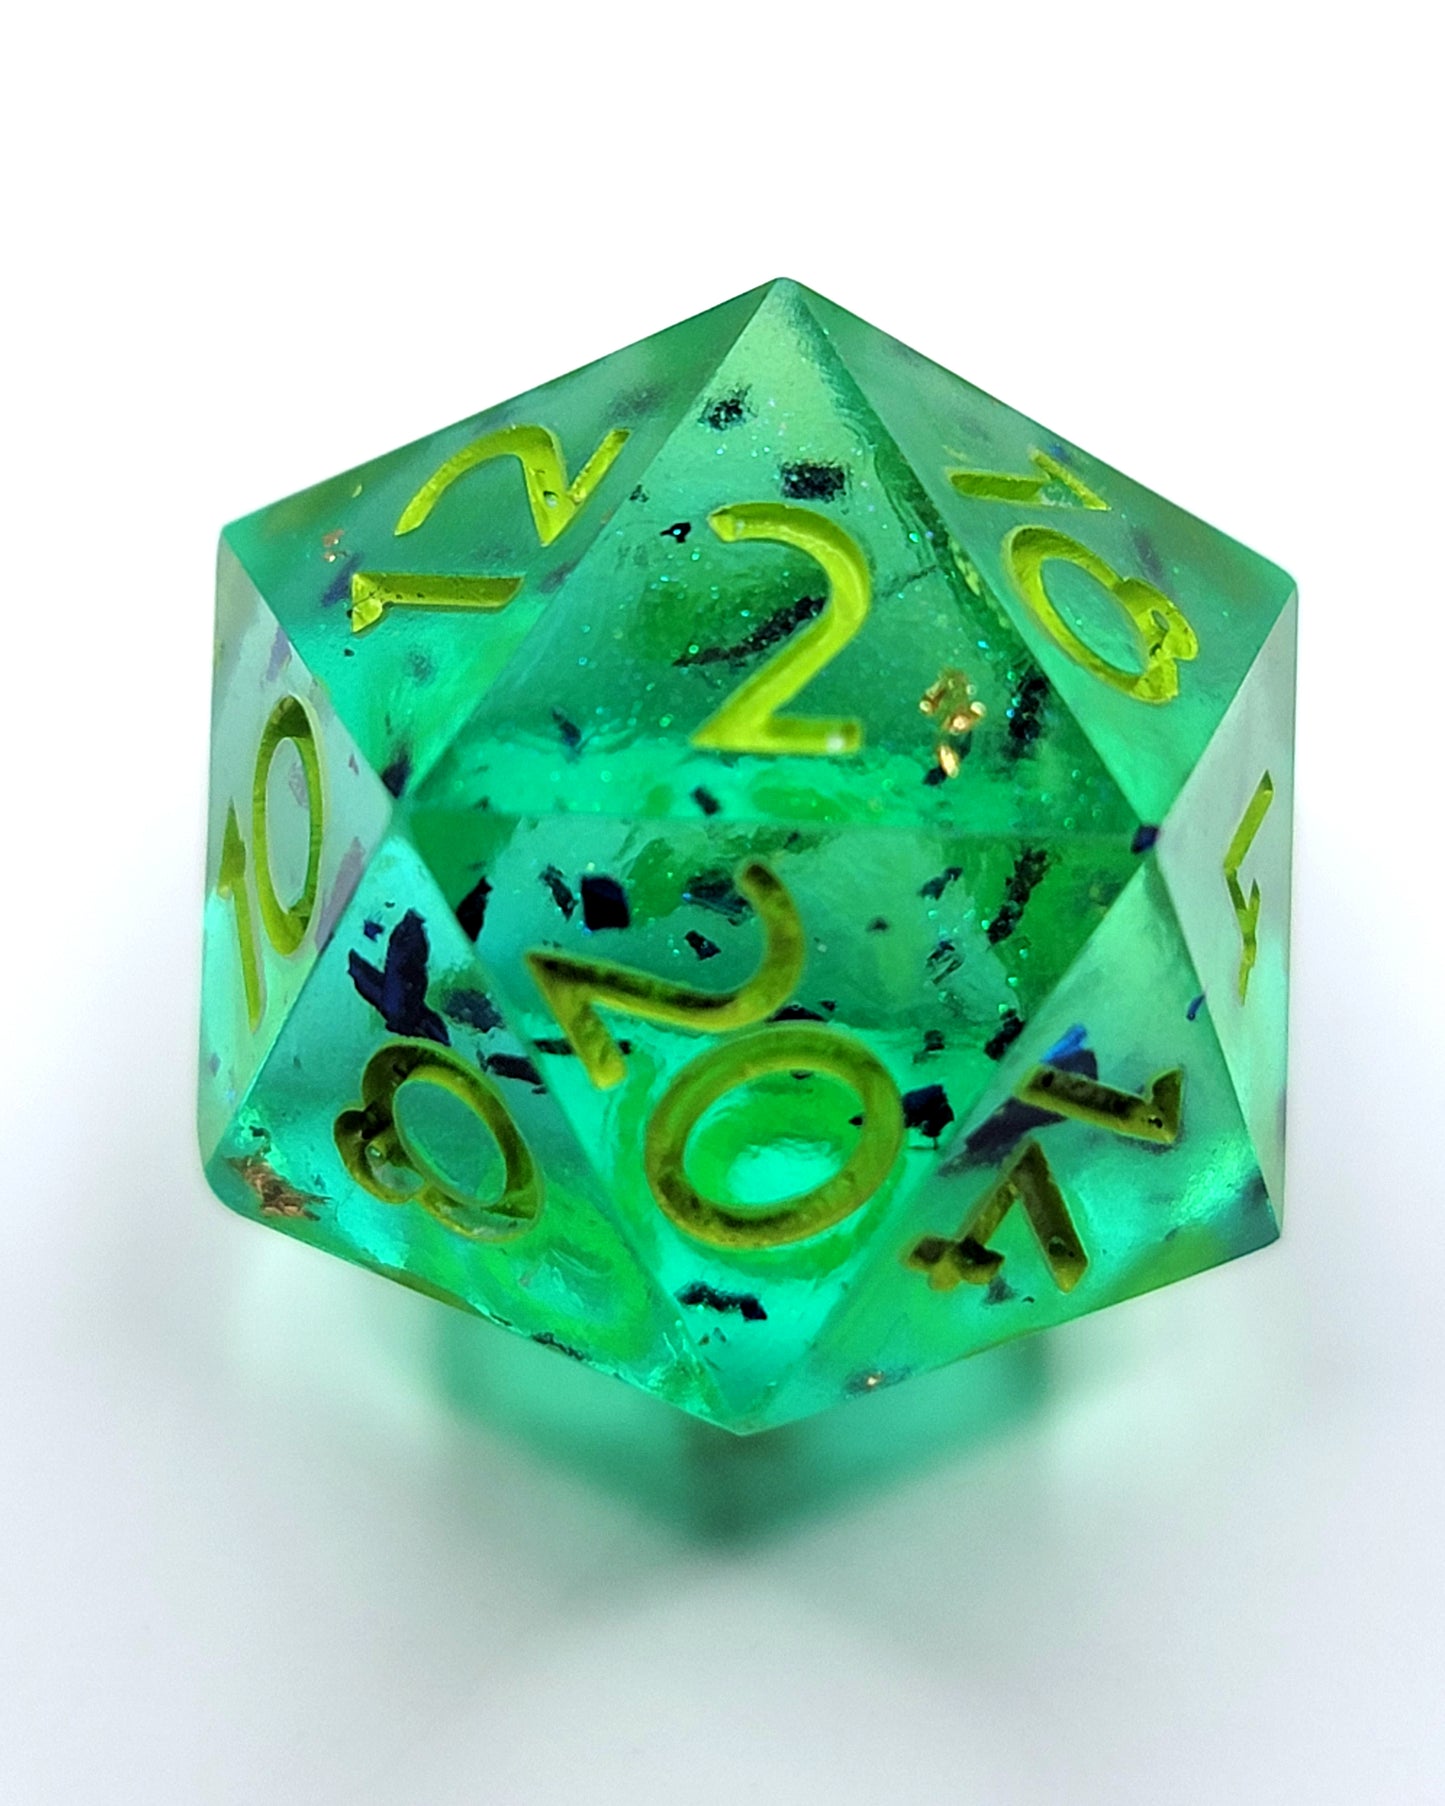 Mermaid Heart -1 D20 | Handmade Dice | Hand Crafted Dungeons and Dragons Dice